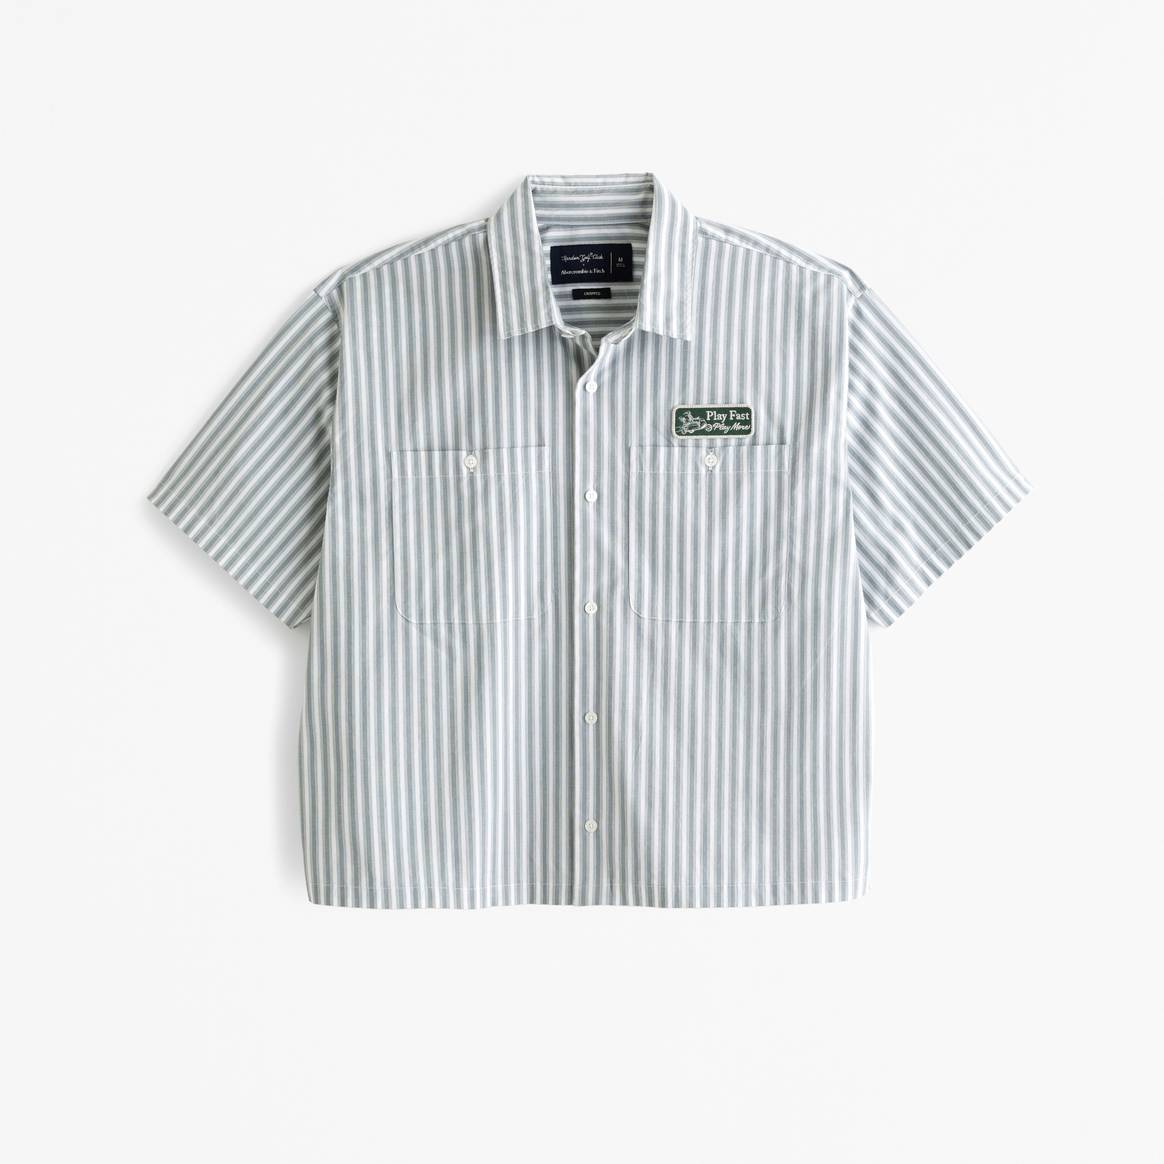 ABERCROMBIE & FITCH x RANDOM GOLF CLUB COLLECTION